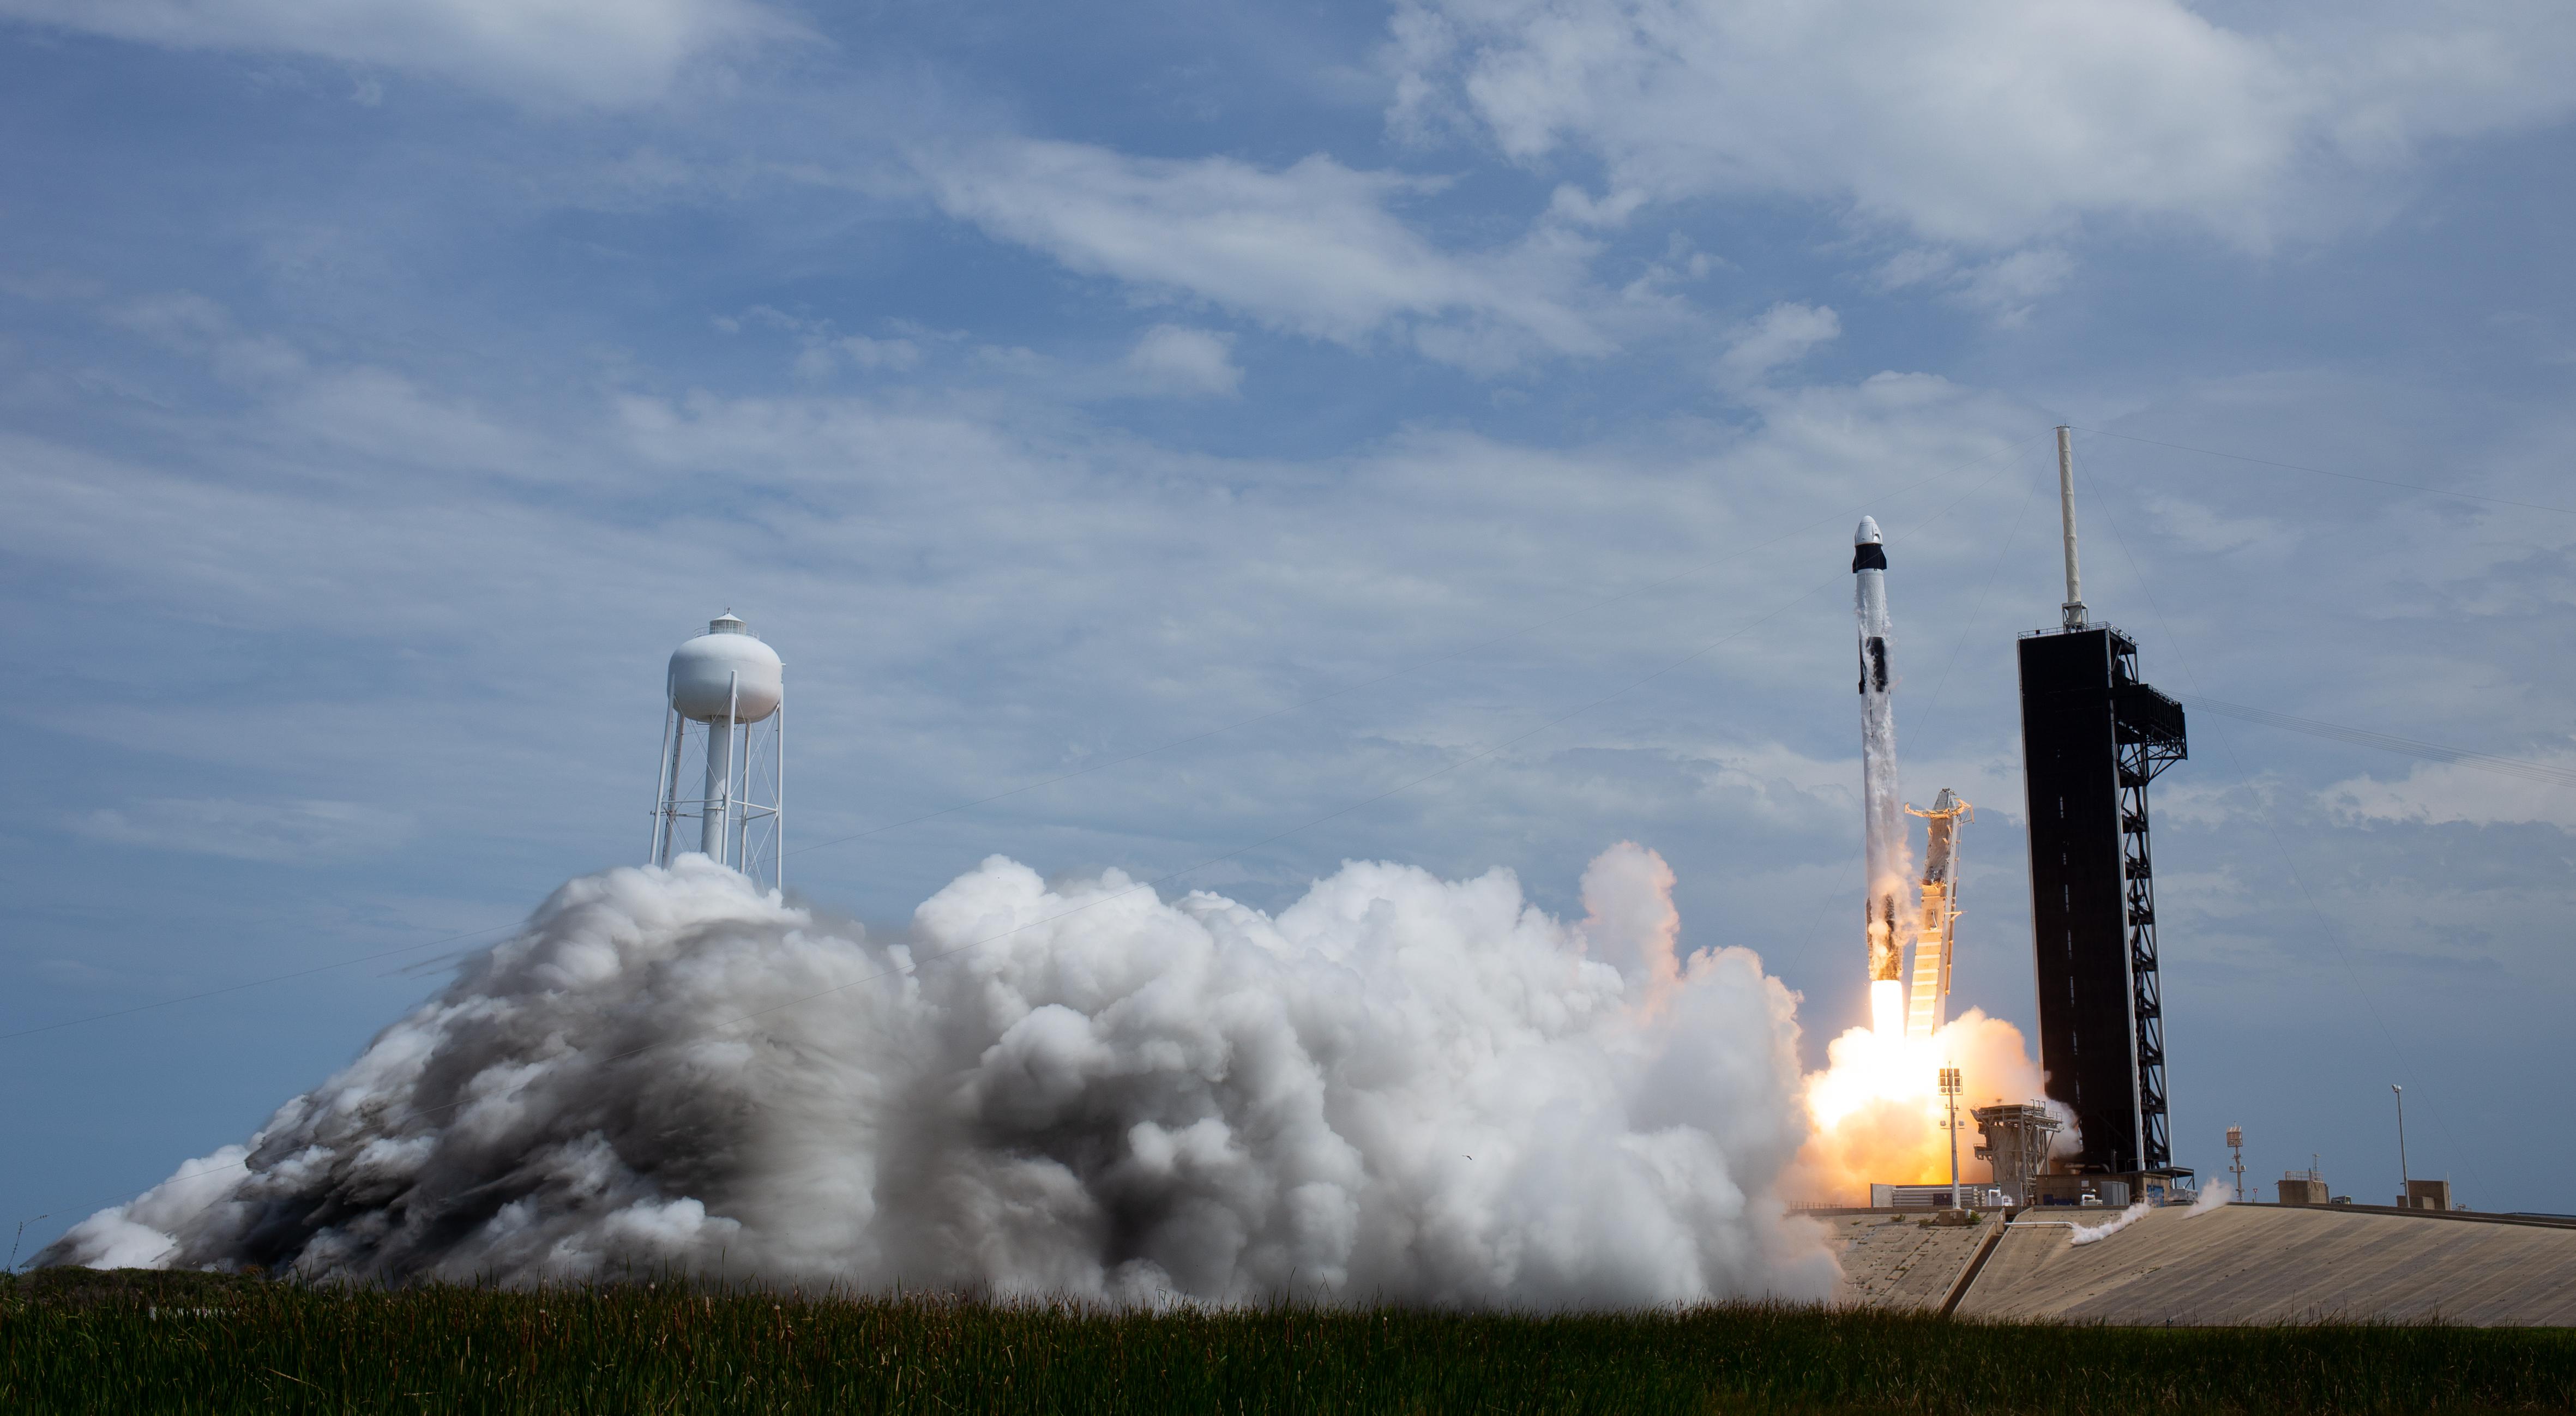 Spacex 4K wallpapers for your desktop or mobile screen free and easy to  download